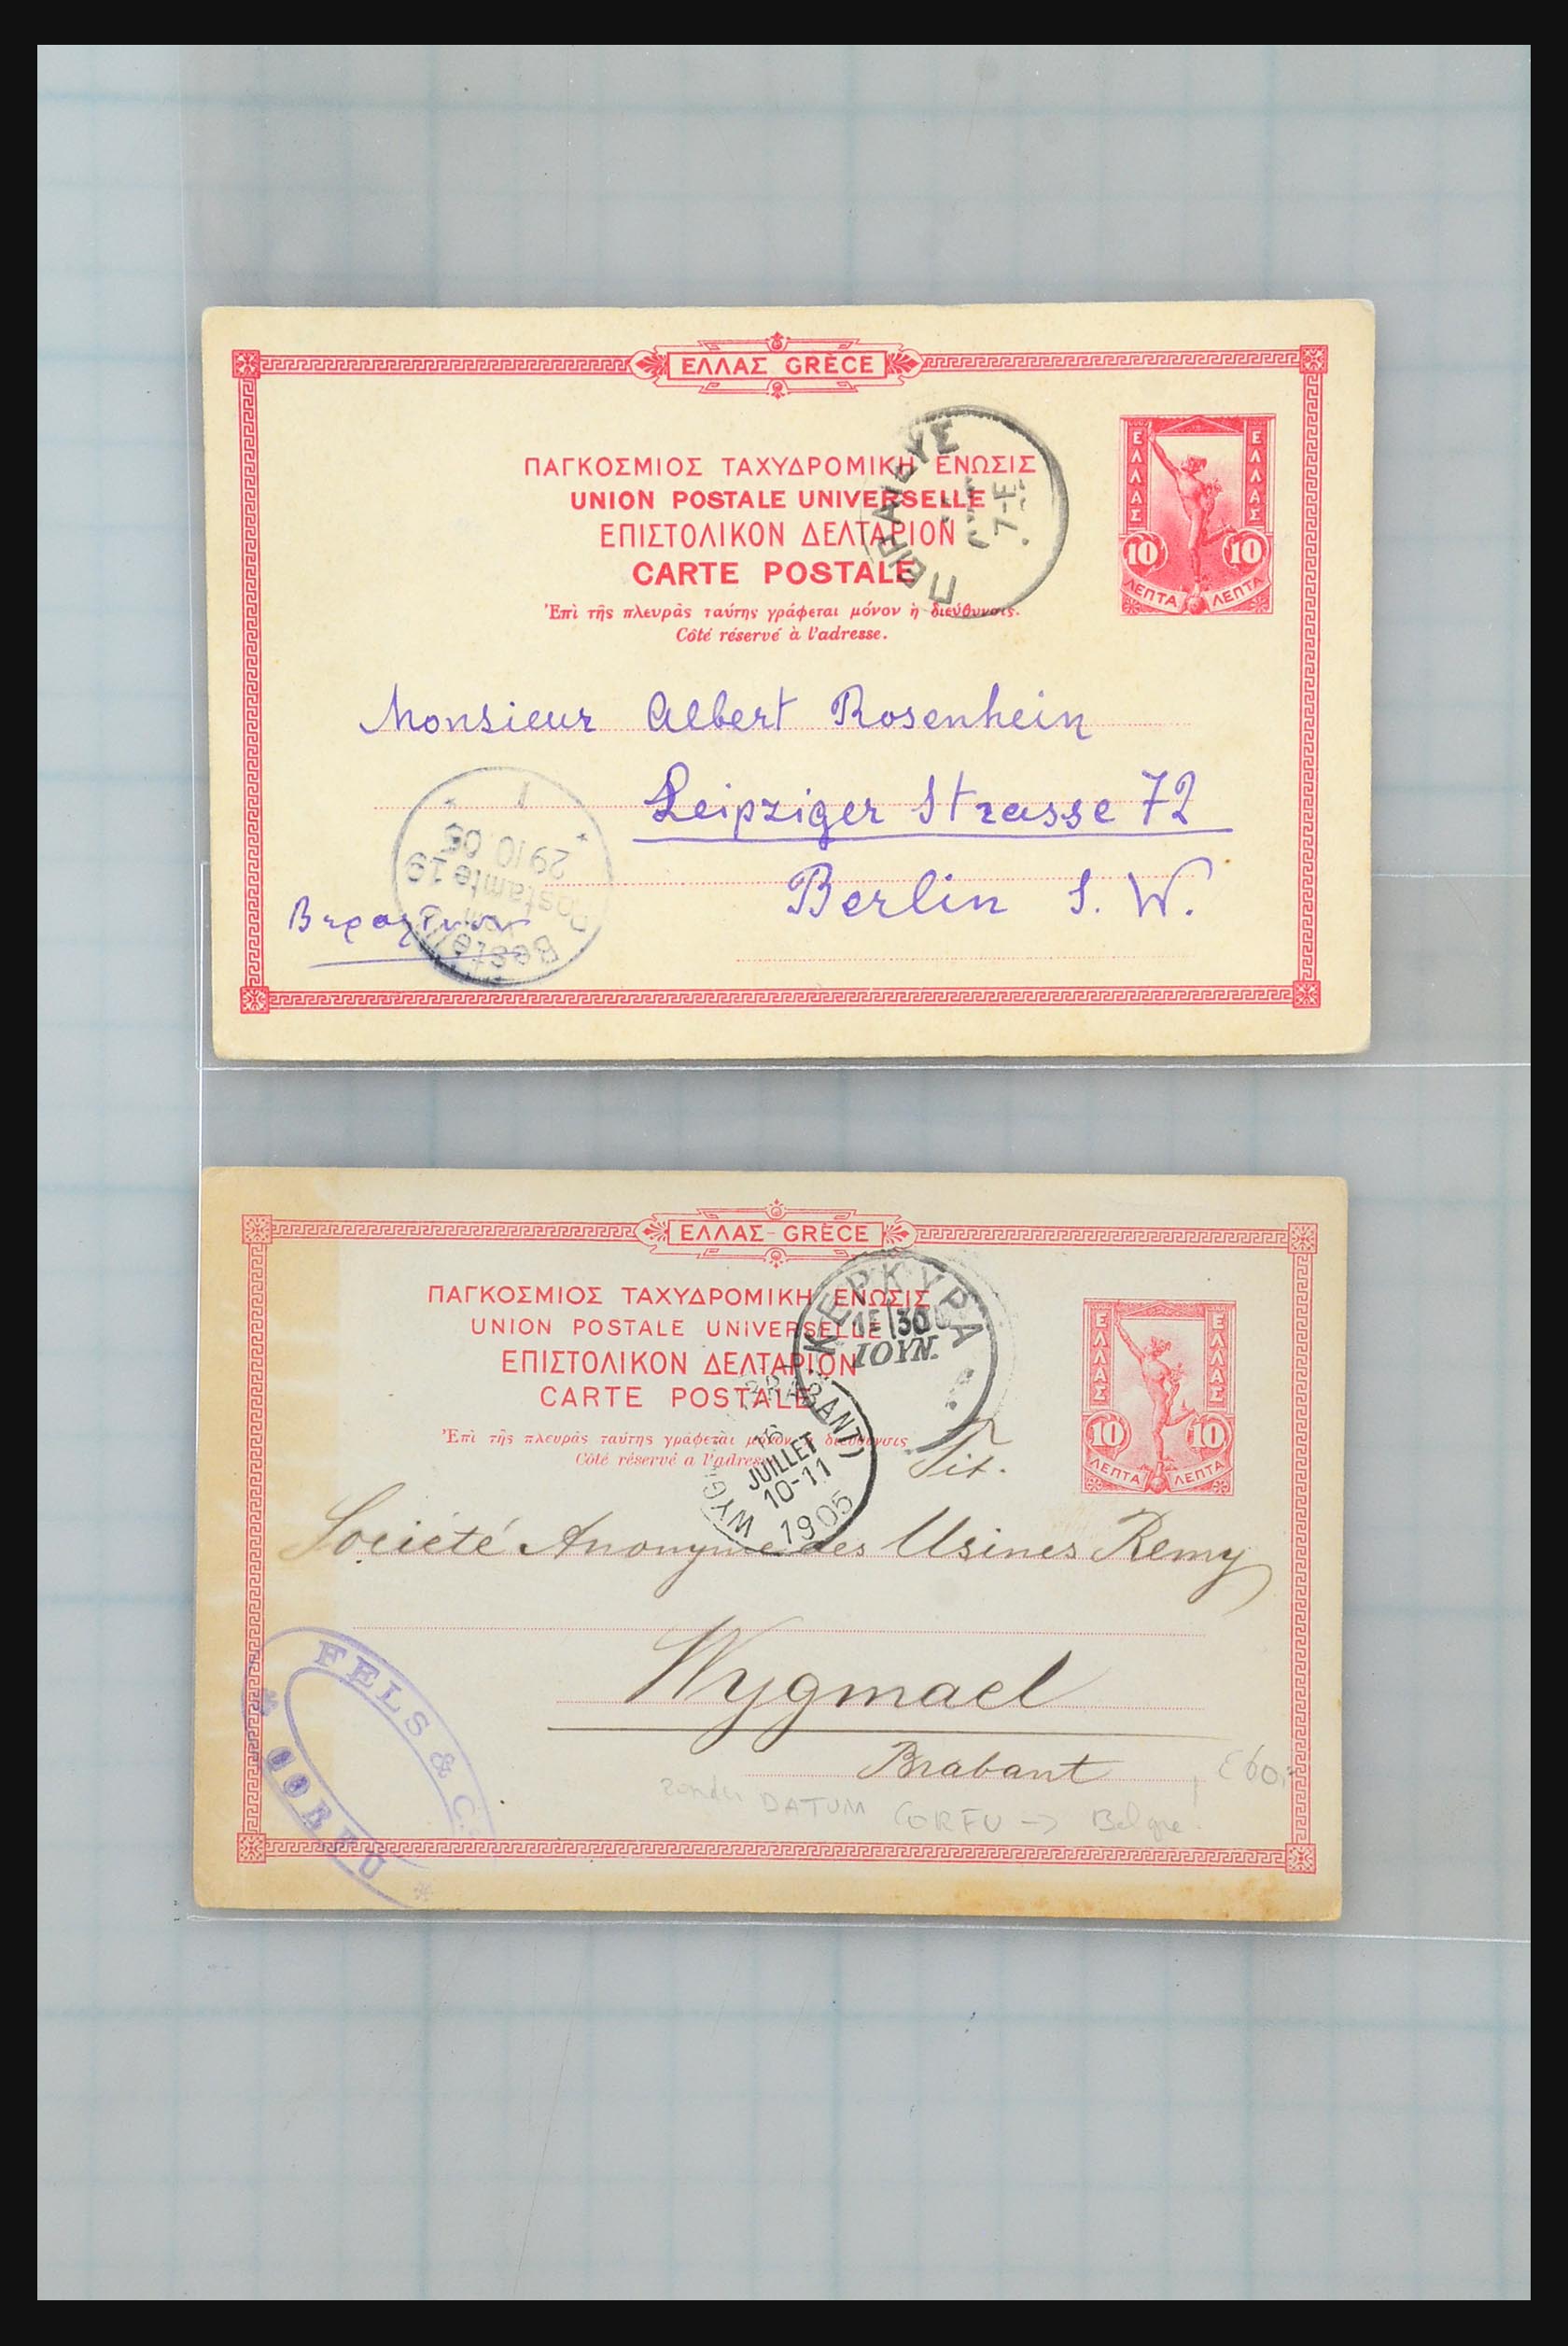 31358 025 - 31358 Portugal/Luxemburg/Greece covers 1880-1960.